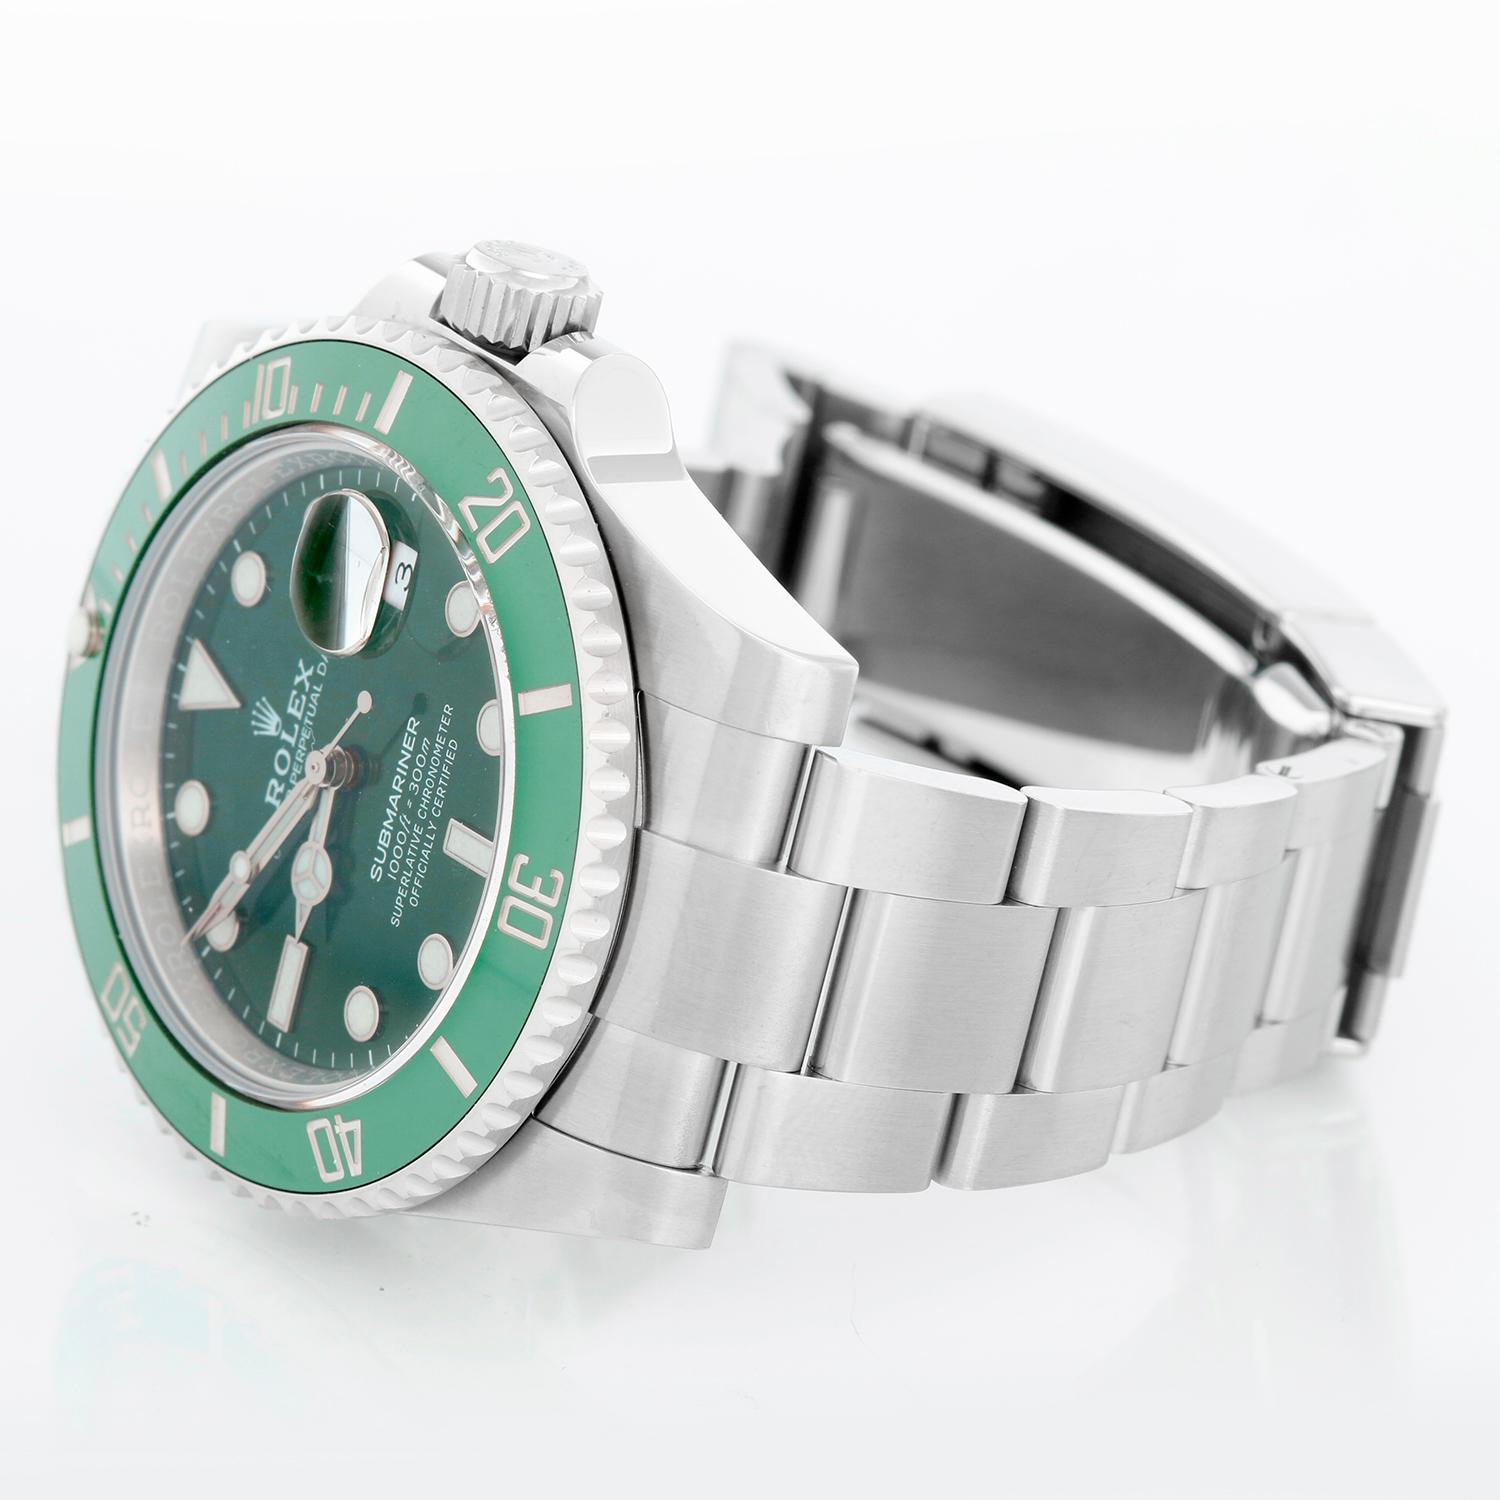 Rolex Submariner Men's Stainless Steel Green Dial Watch 116610LV - Automatic winding, 31 jewels, pressure proof to 1,000 feet. Stainless steel case with green time-lapse Ceramic Cerachrom bezel (40mm diameter). Green dial with luminous markers; date